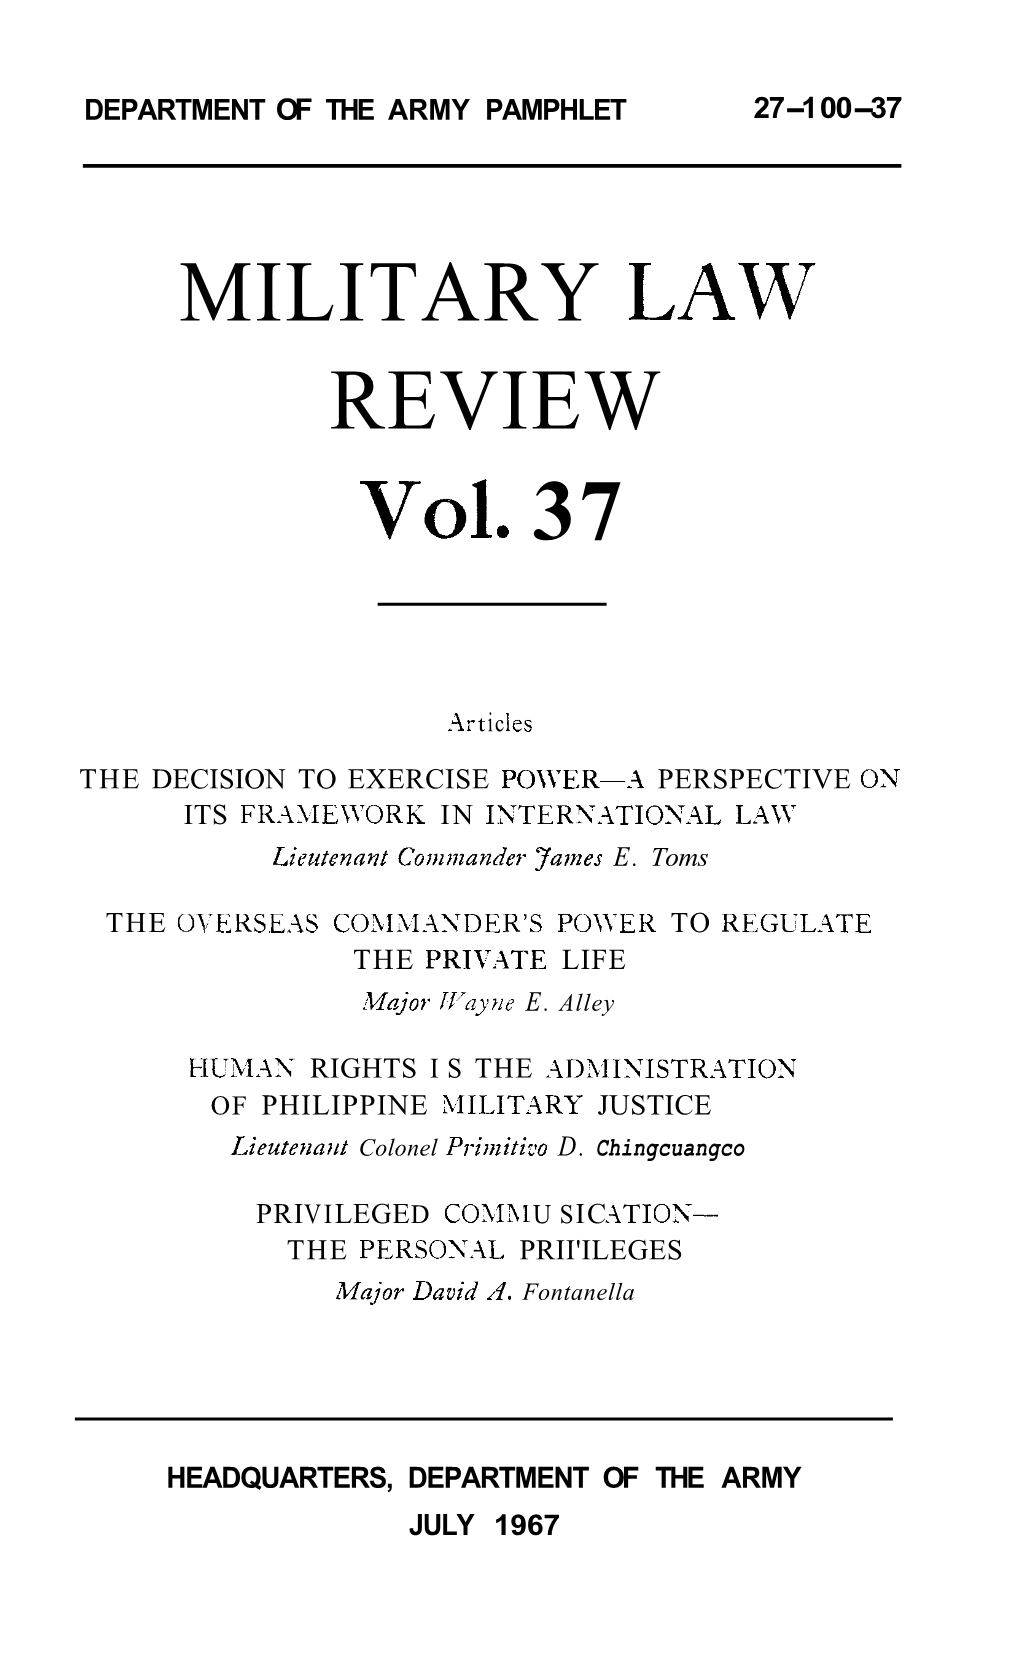 MILITARY LAW REVIEW Vol. 37